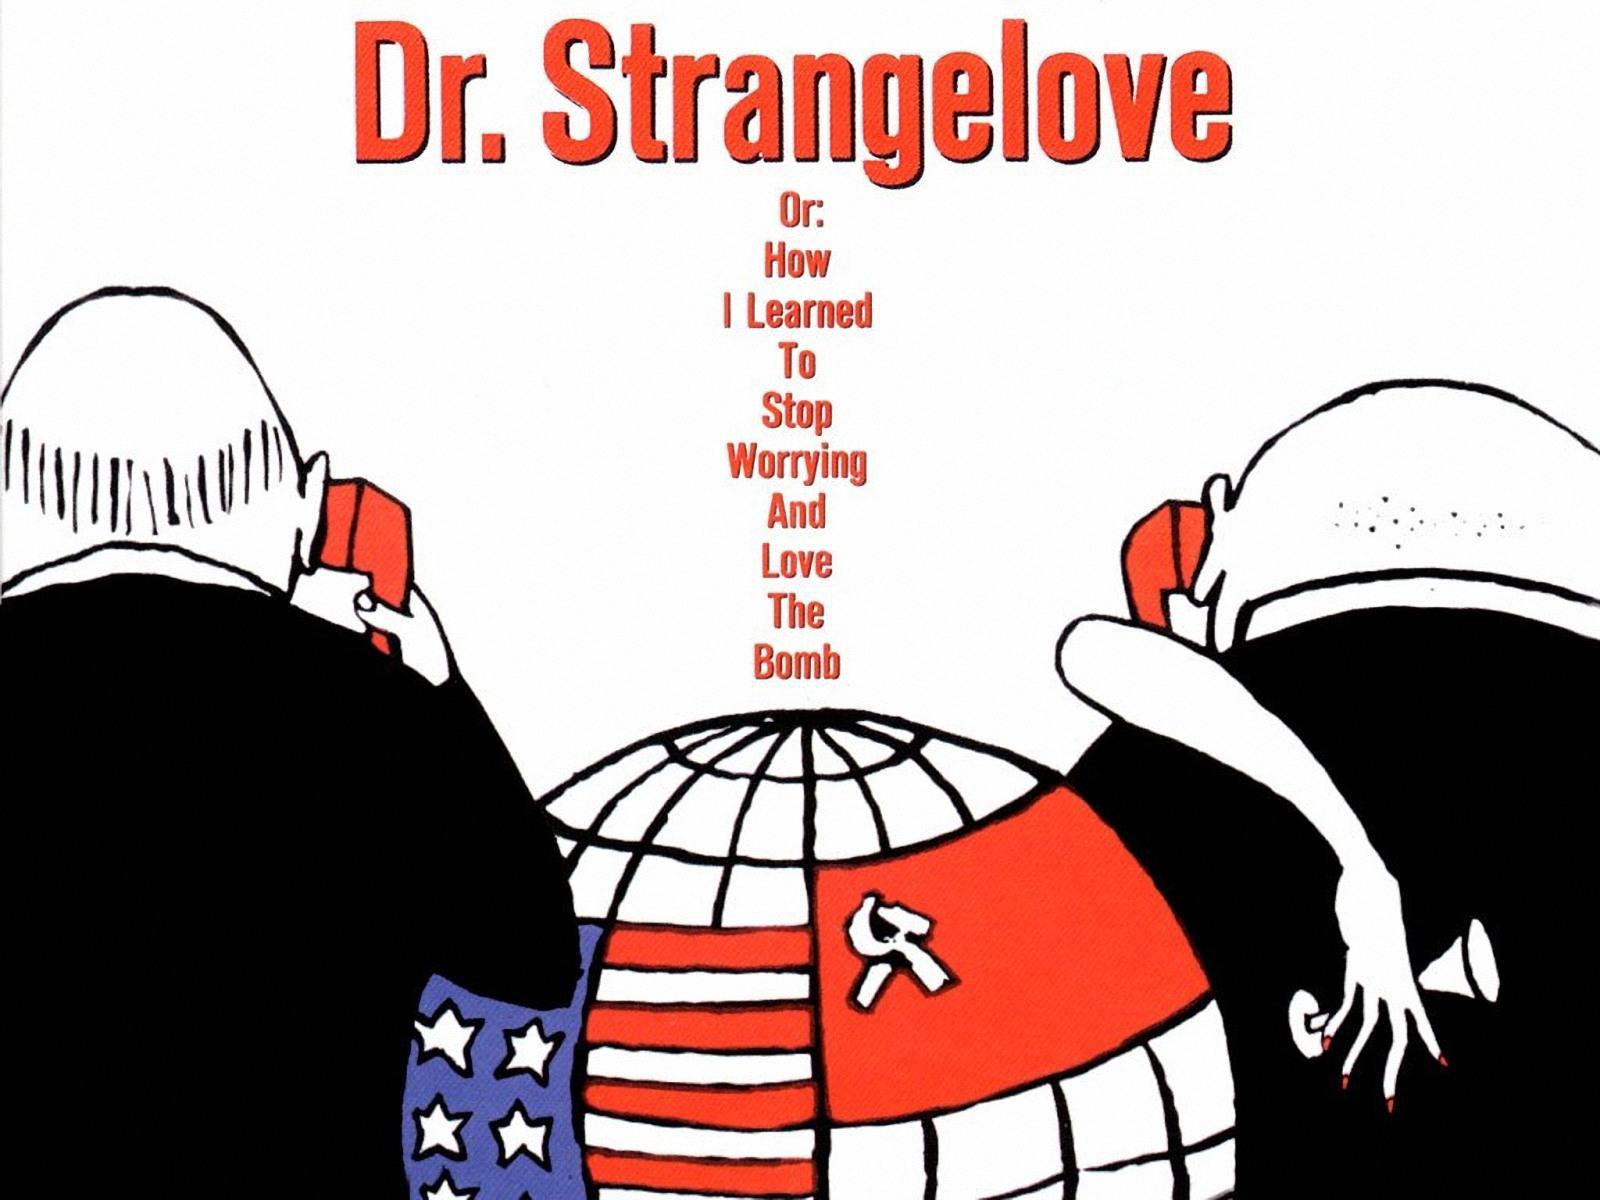 Download wallpaper 1600x1200 dr strangelove or how i learned to stop